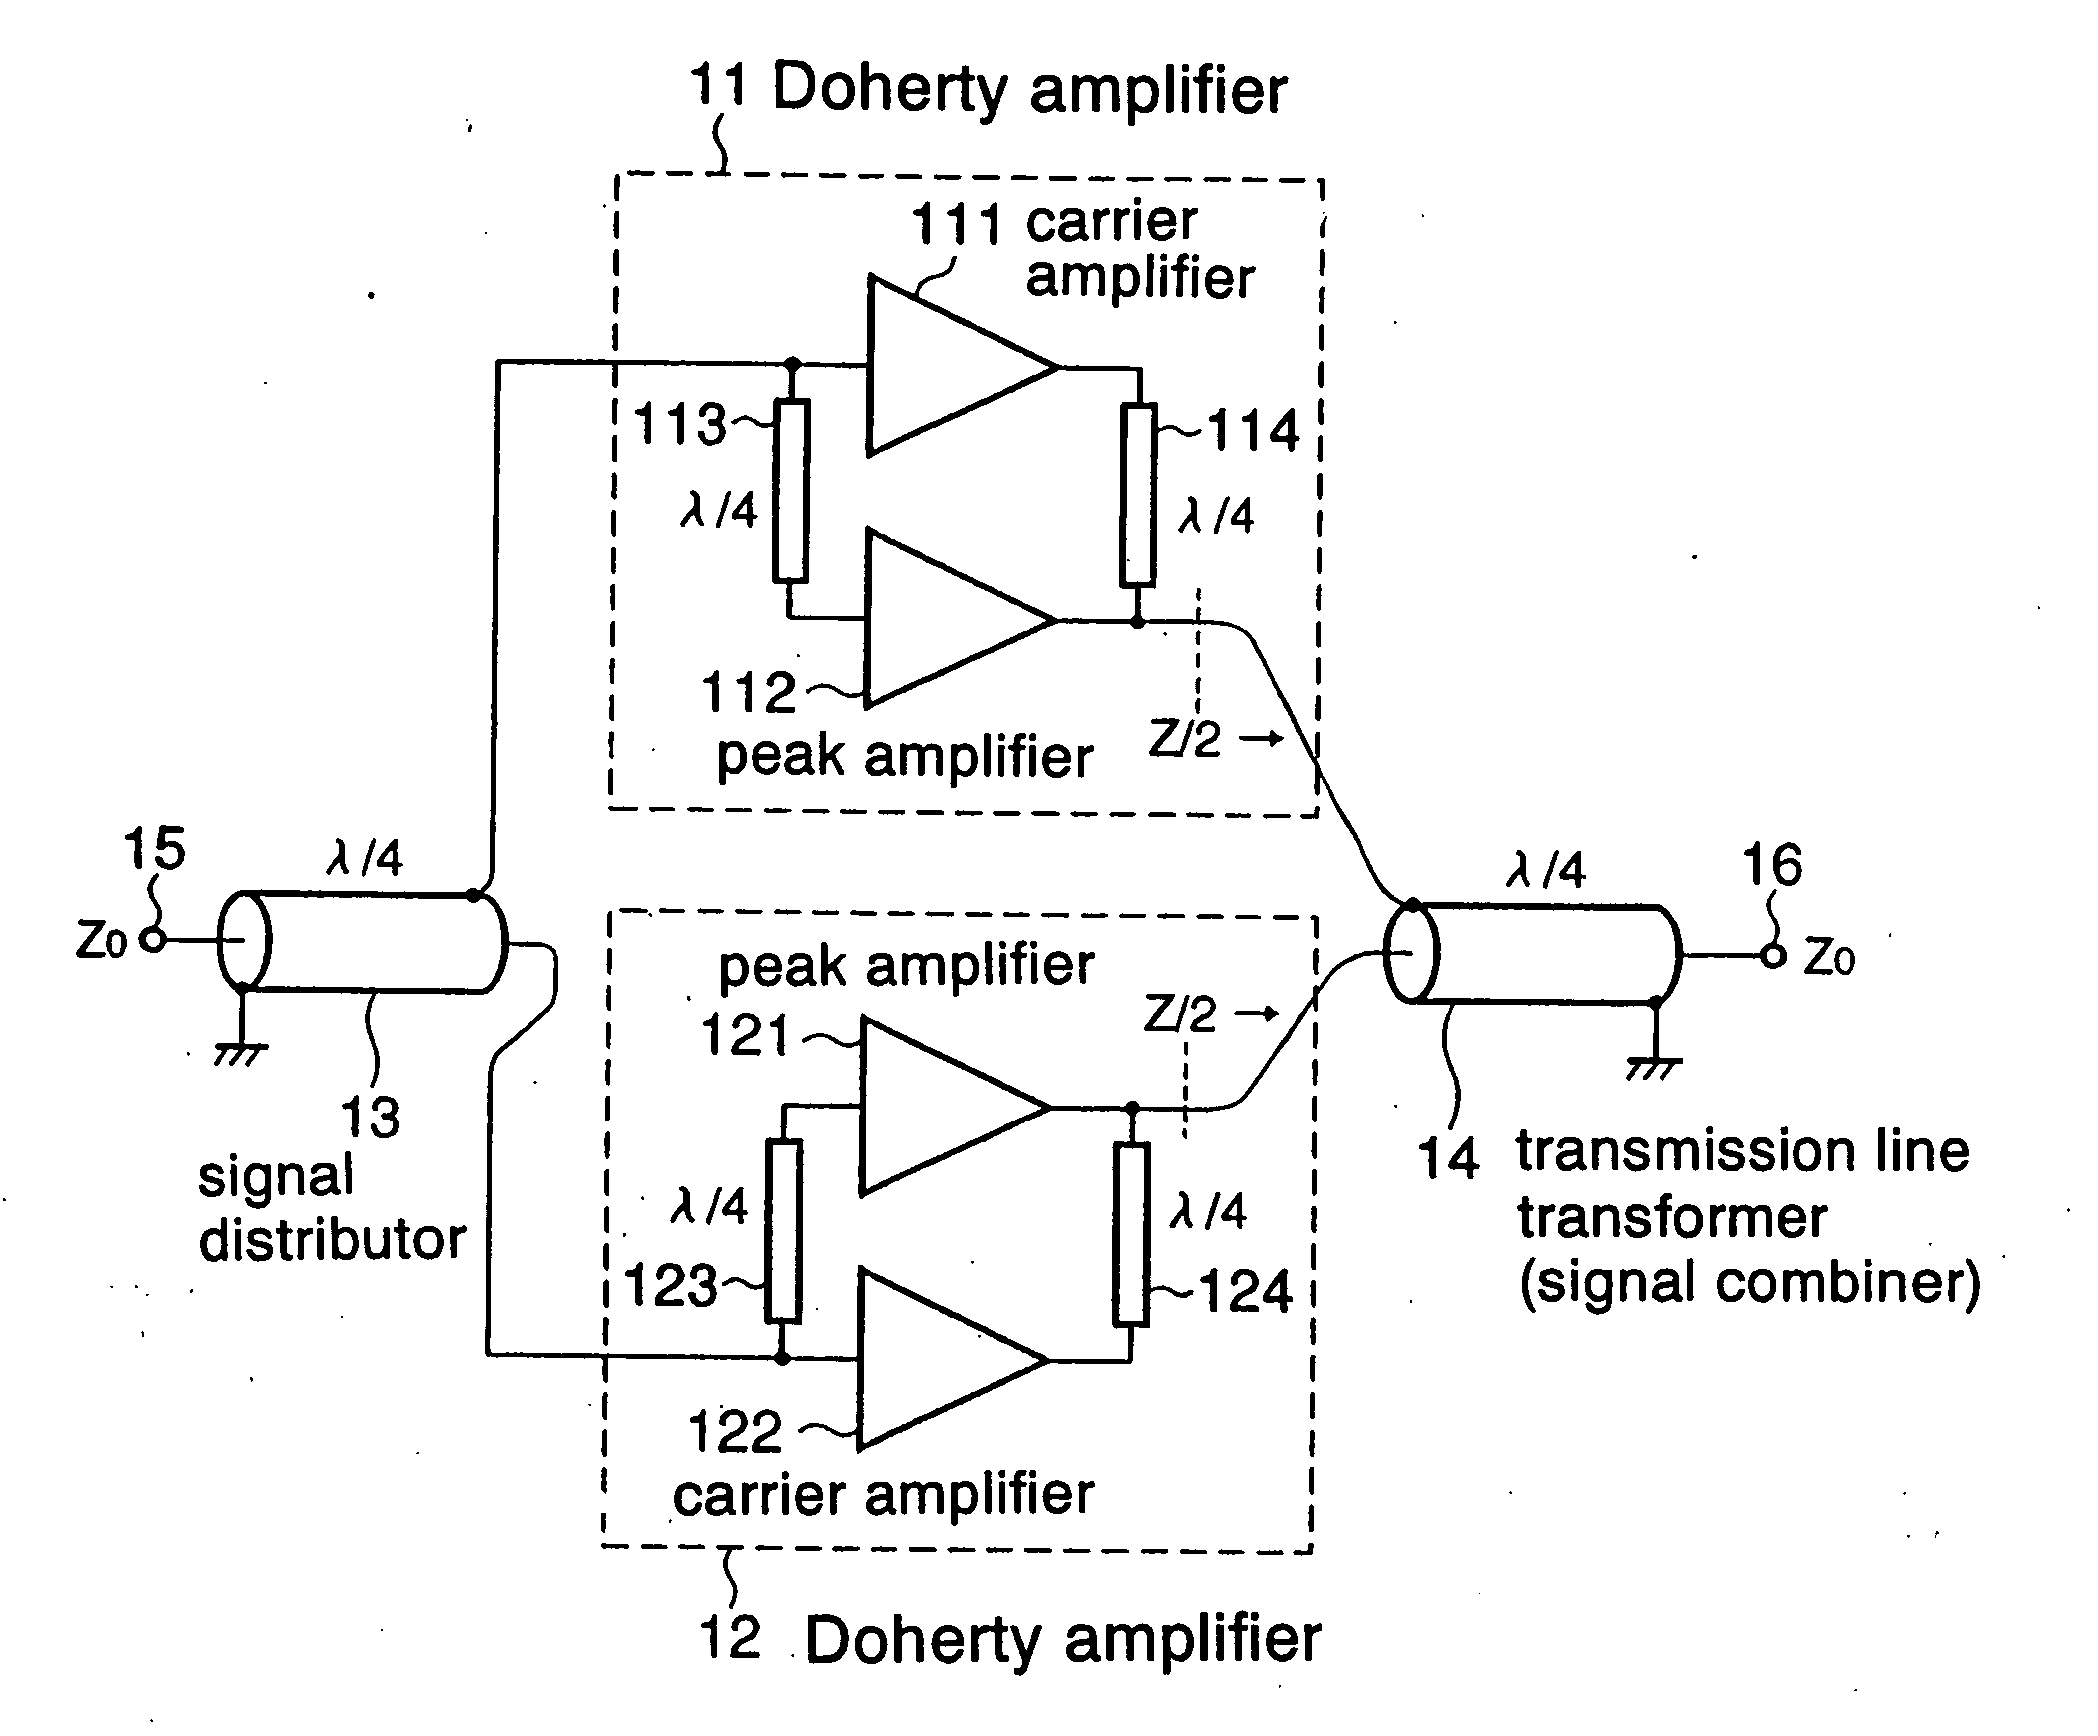 Circuit for parallel operation of Doherty amplifiers